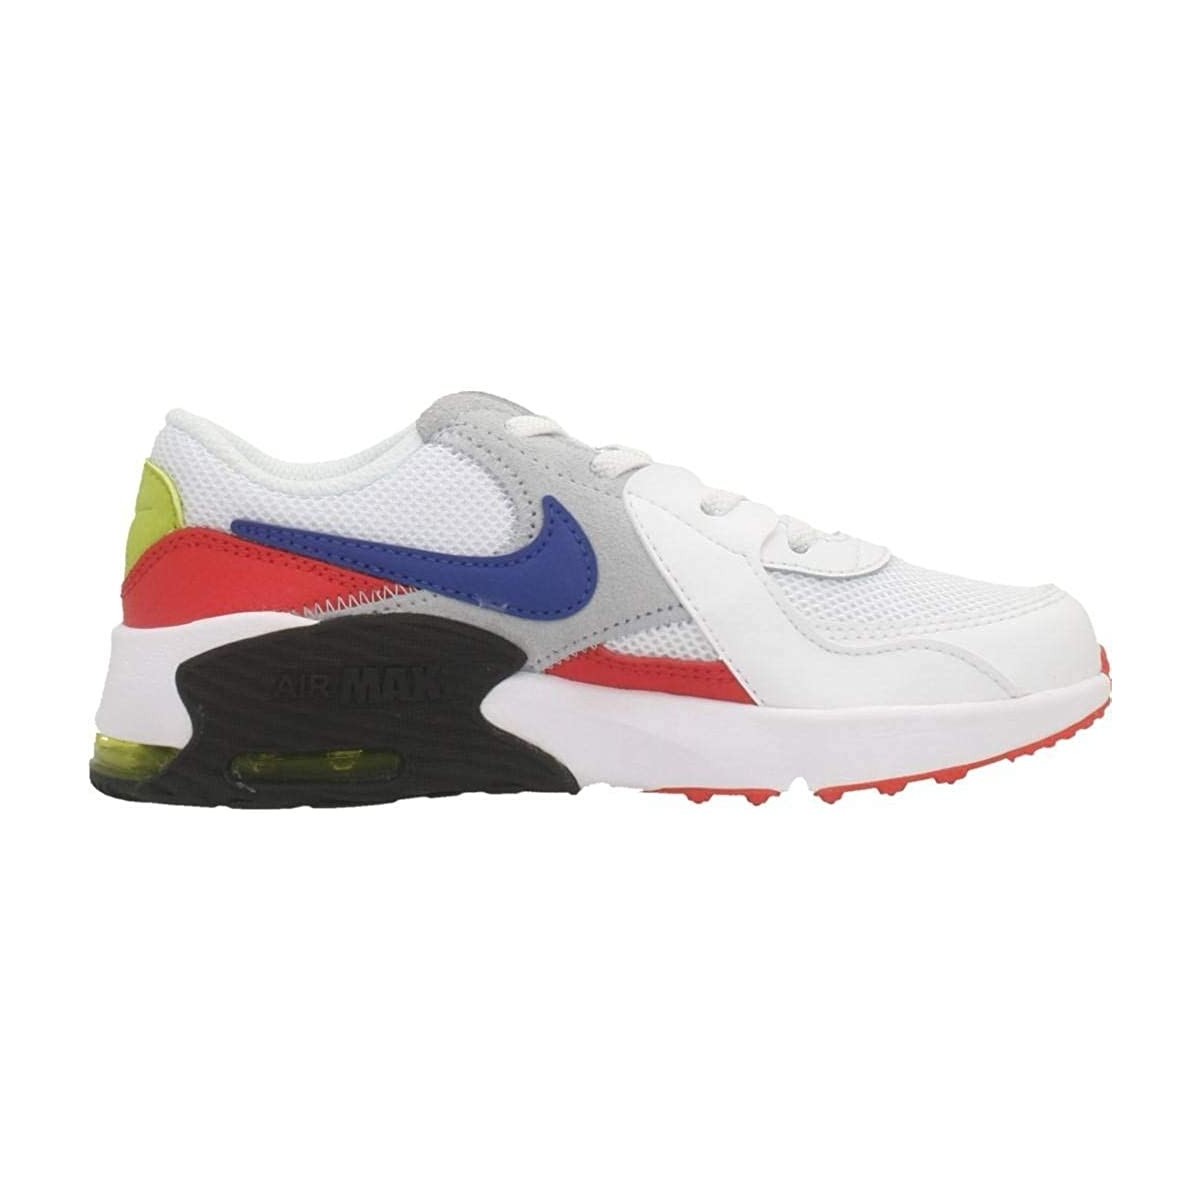 Nike CD6892 PS Max 101 Air Shoes Excee